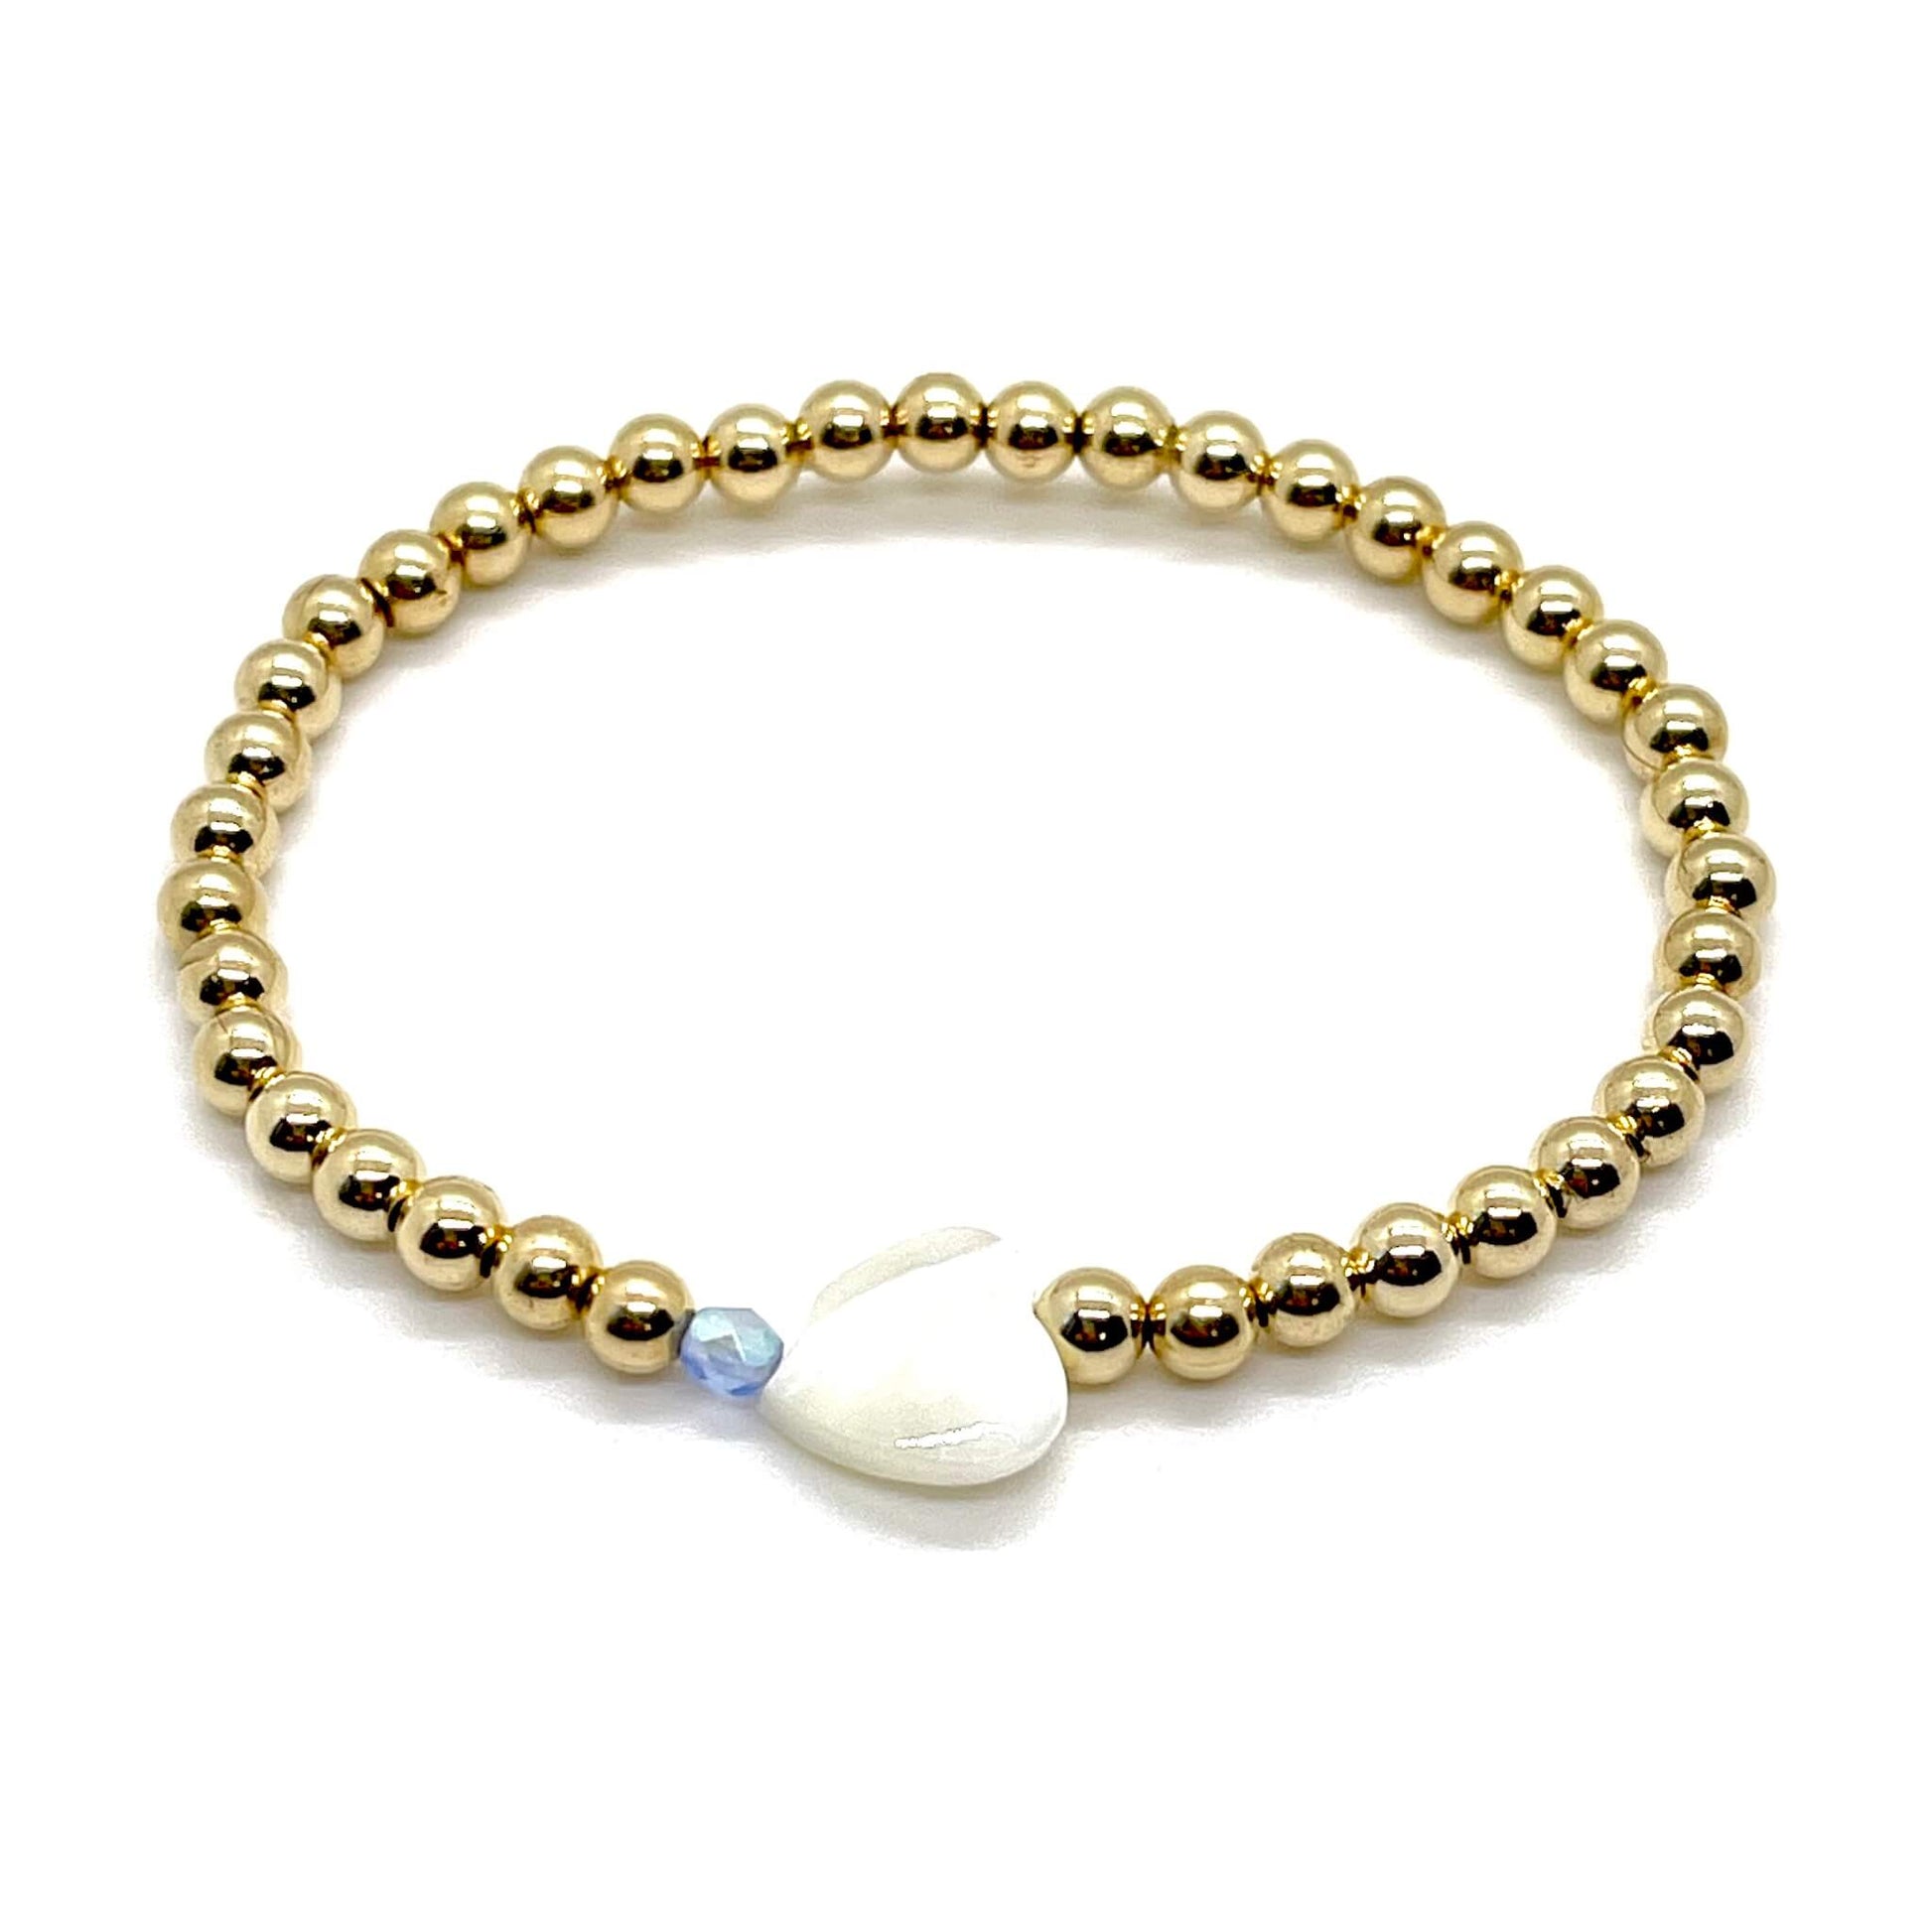 Gold heart bracelet with a mother-of-pearl heart, a small faceted blue crystal, and 4mm 14K gold filled beads.